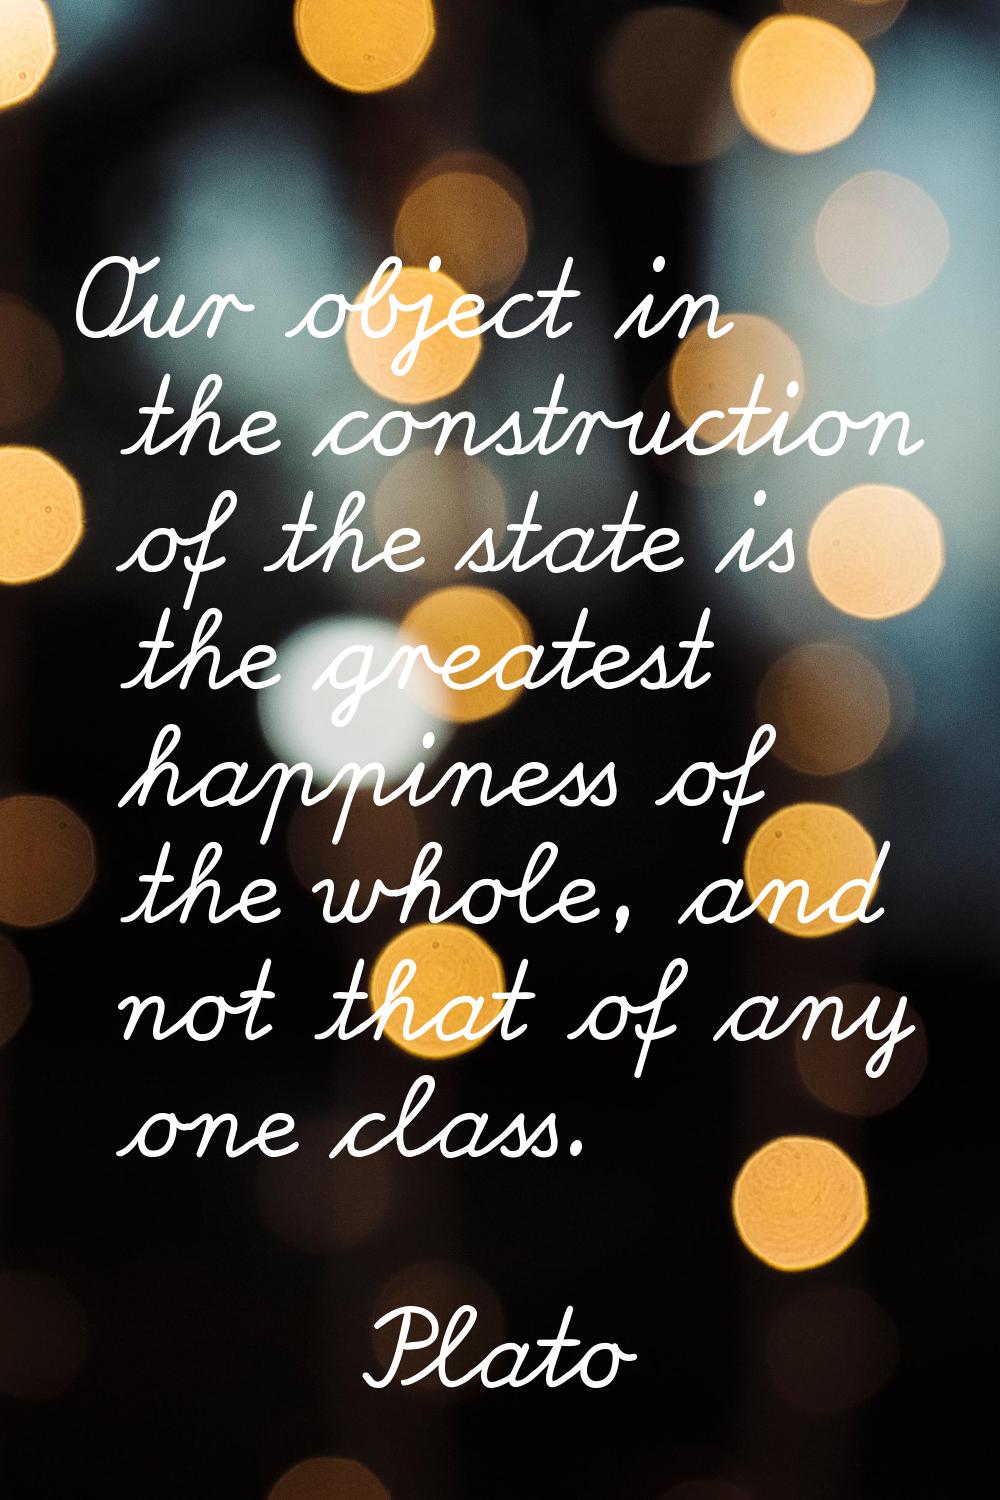 Our object in the construction of the state is the greatest happiness of the whole, and not that of